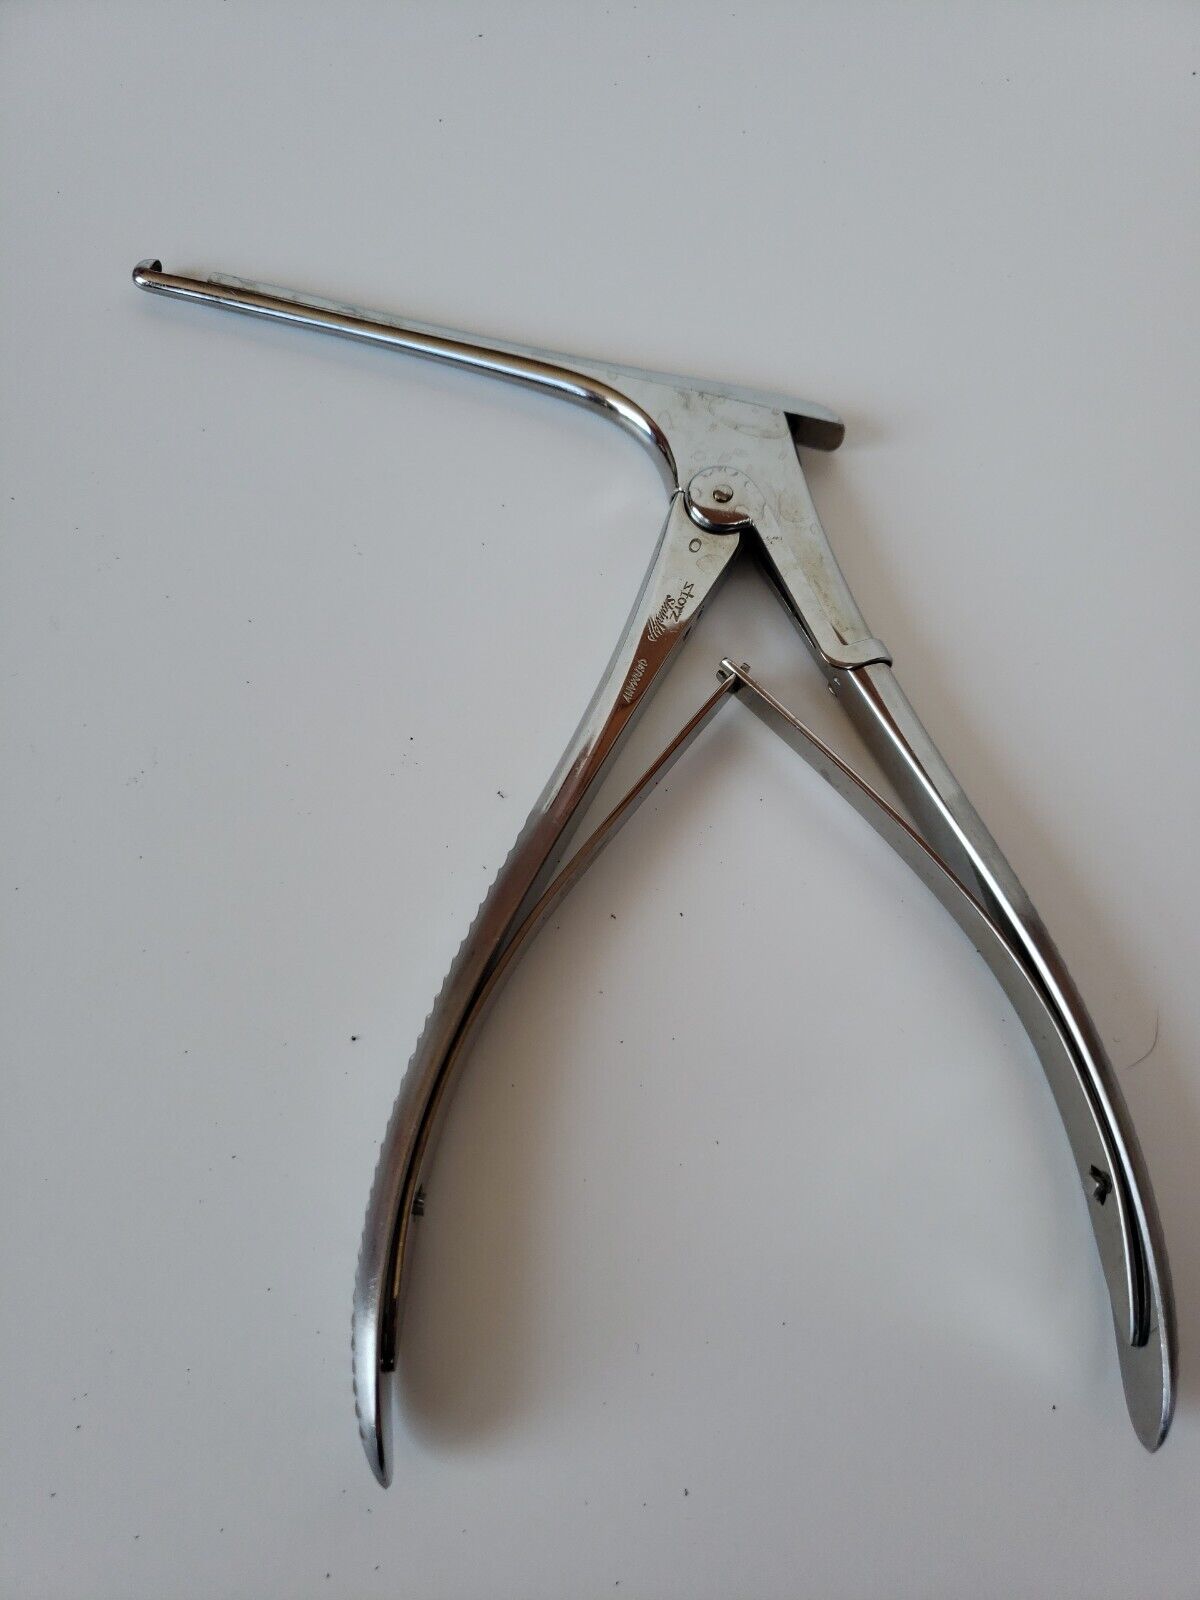 Vintage Sinus Rongeur Forceps Pliers Medical Surgical Storz Germany Stainless